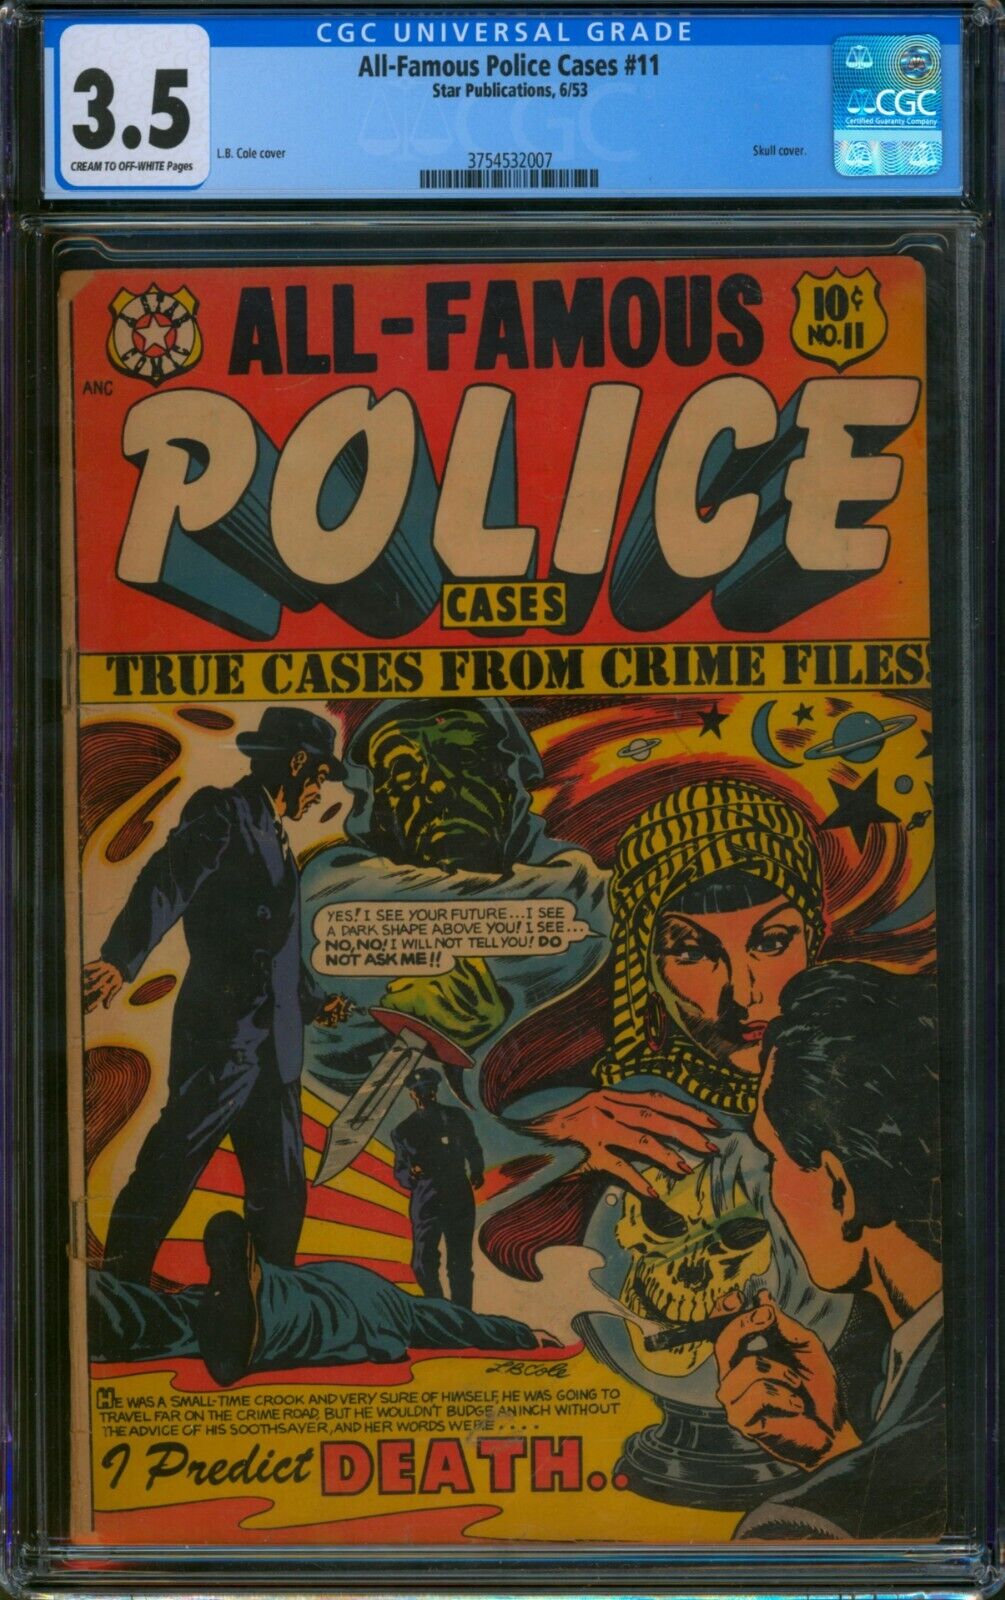 ALL-FAMOUS POLICE CASES #11 (1953) 💥 CGC 3.5 💥 LB COLE Skull Golden Age Star